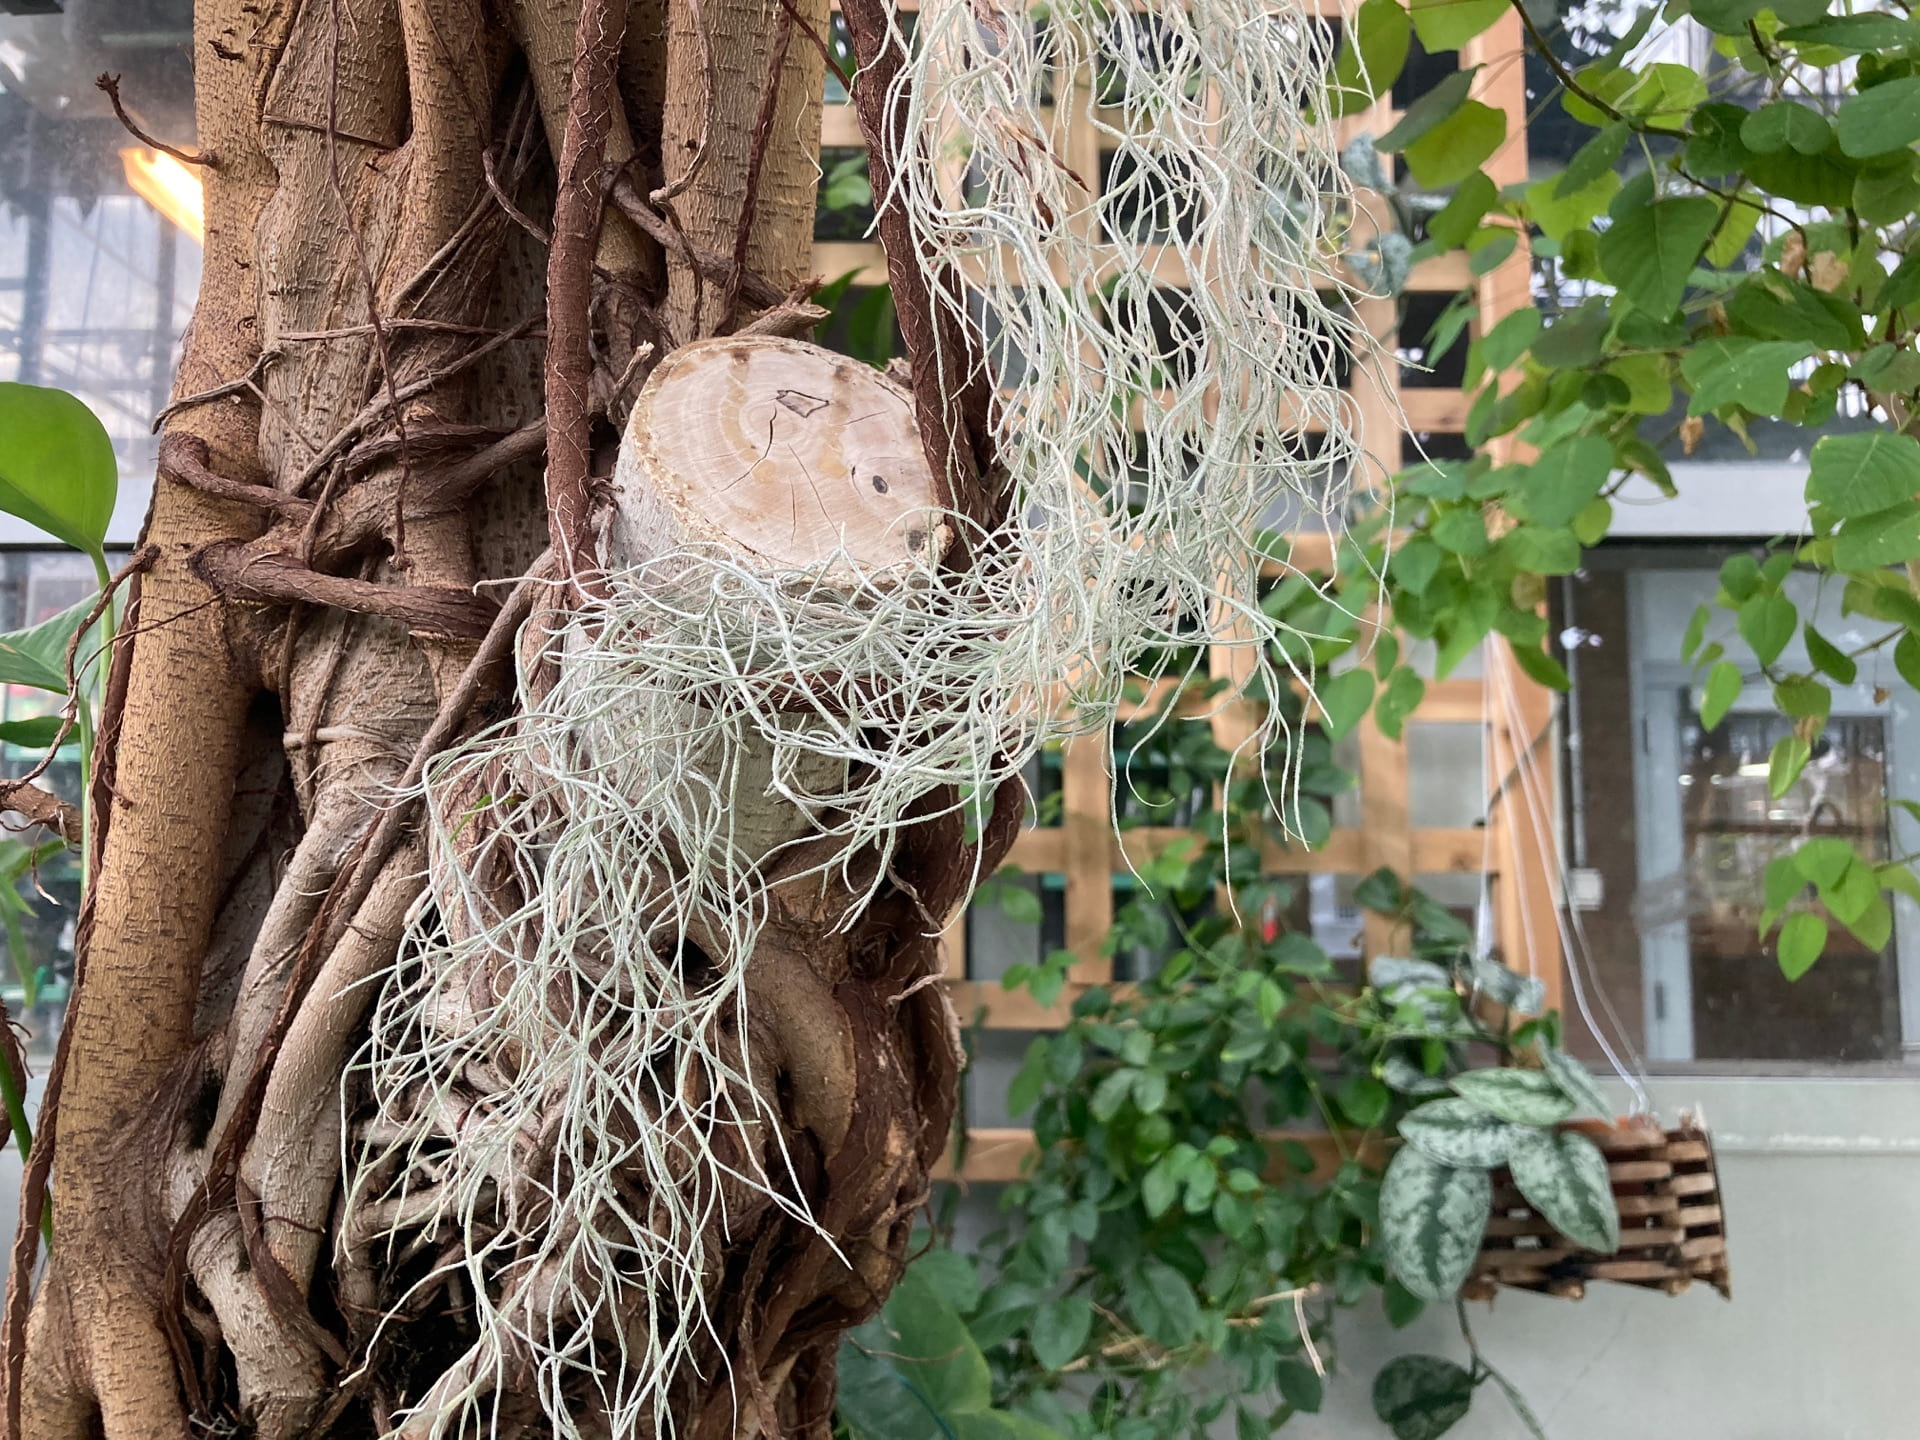 Tillandsia usneoides, Spanish moss, is a staple of the landscape in the American South. It is epiphytic and gets all of its water and nutrients from the air and the morning dew.